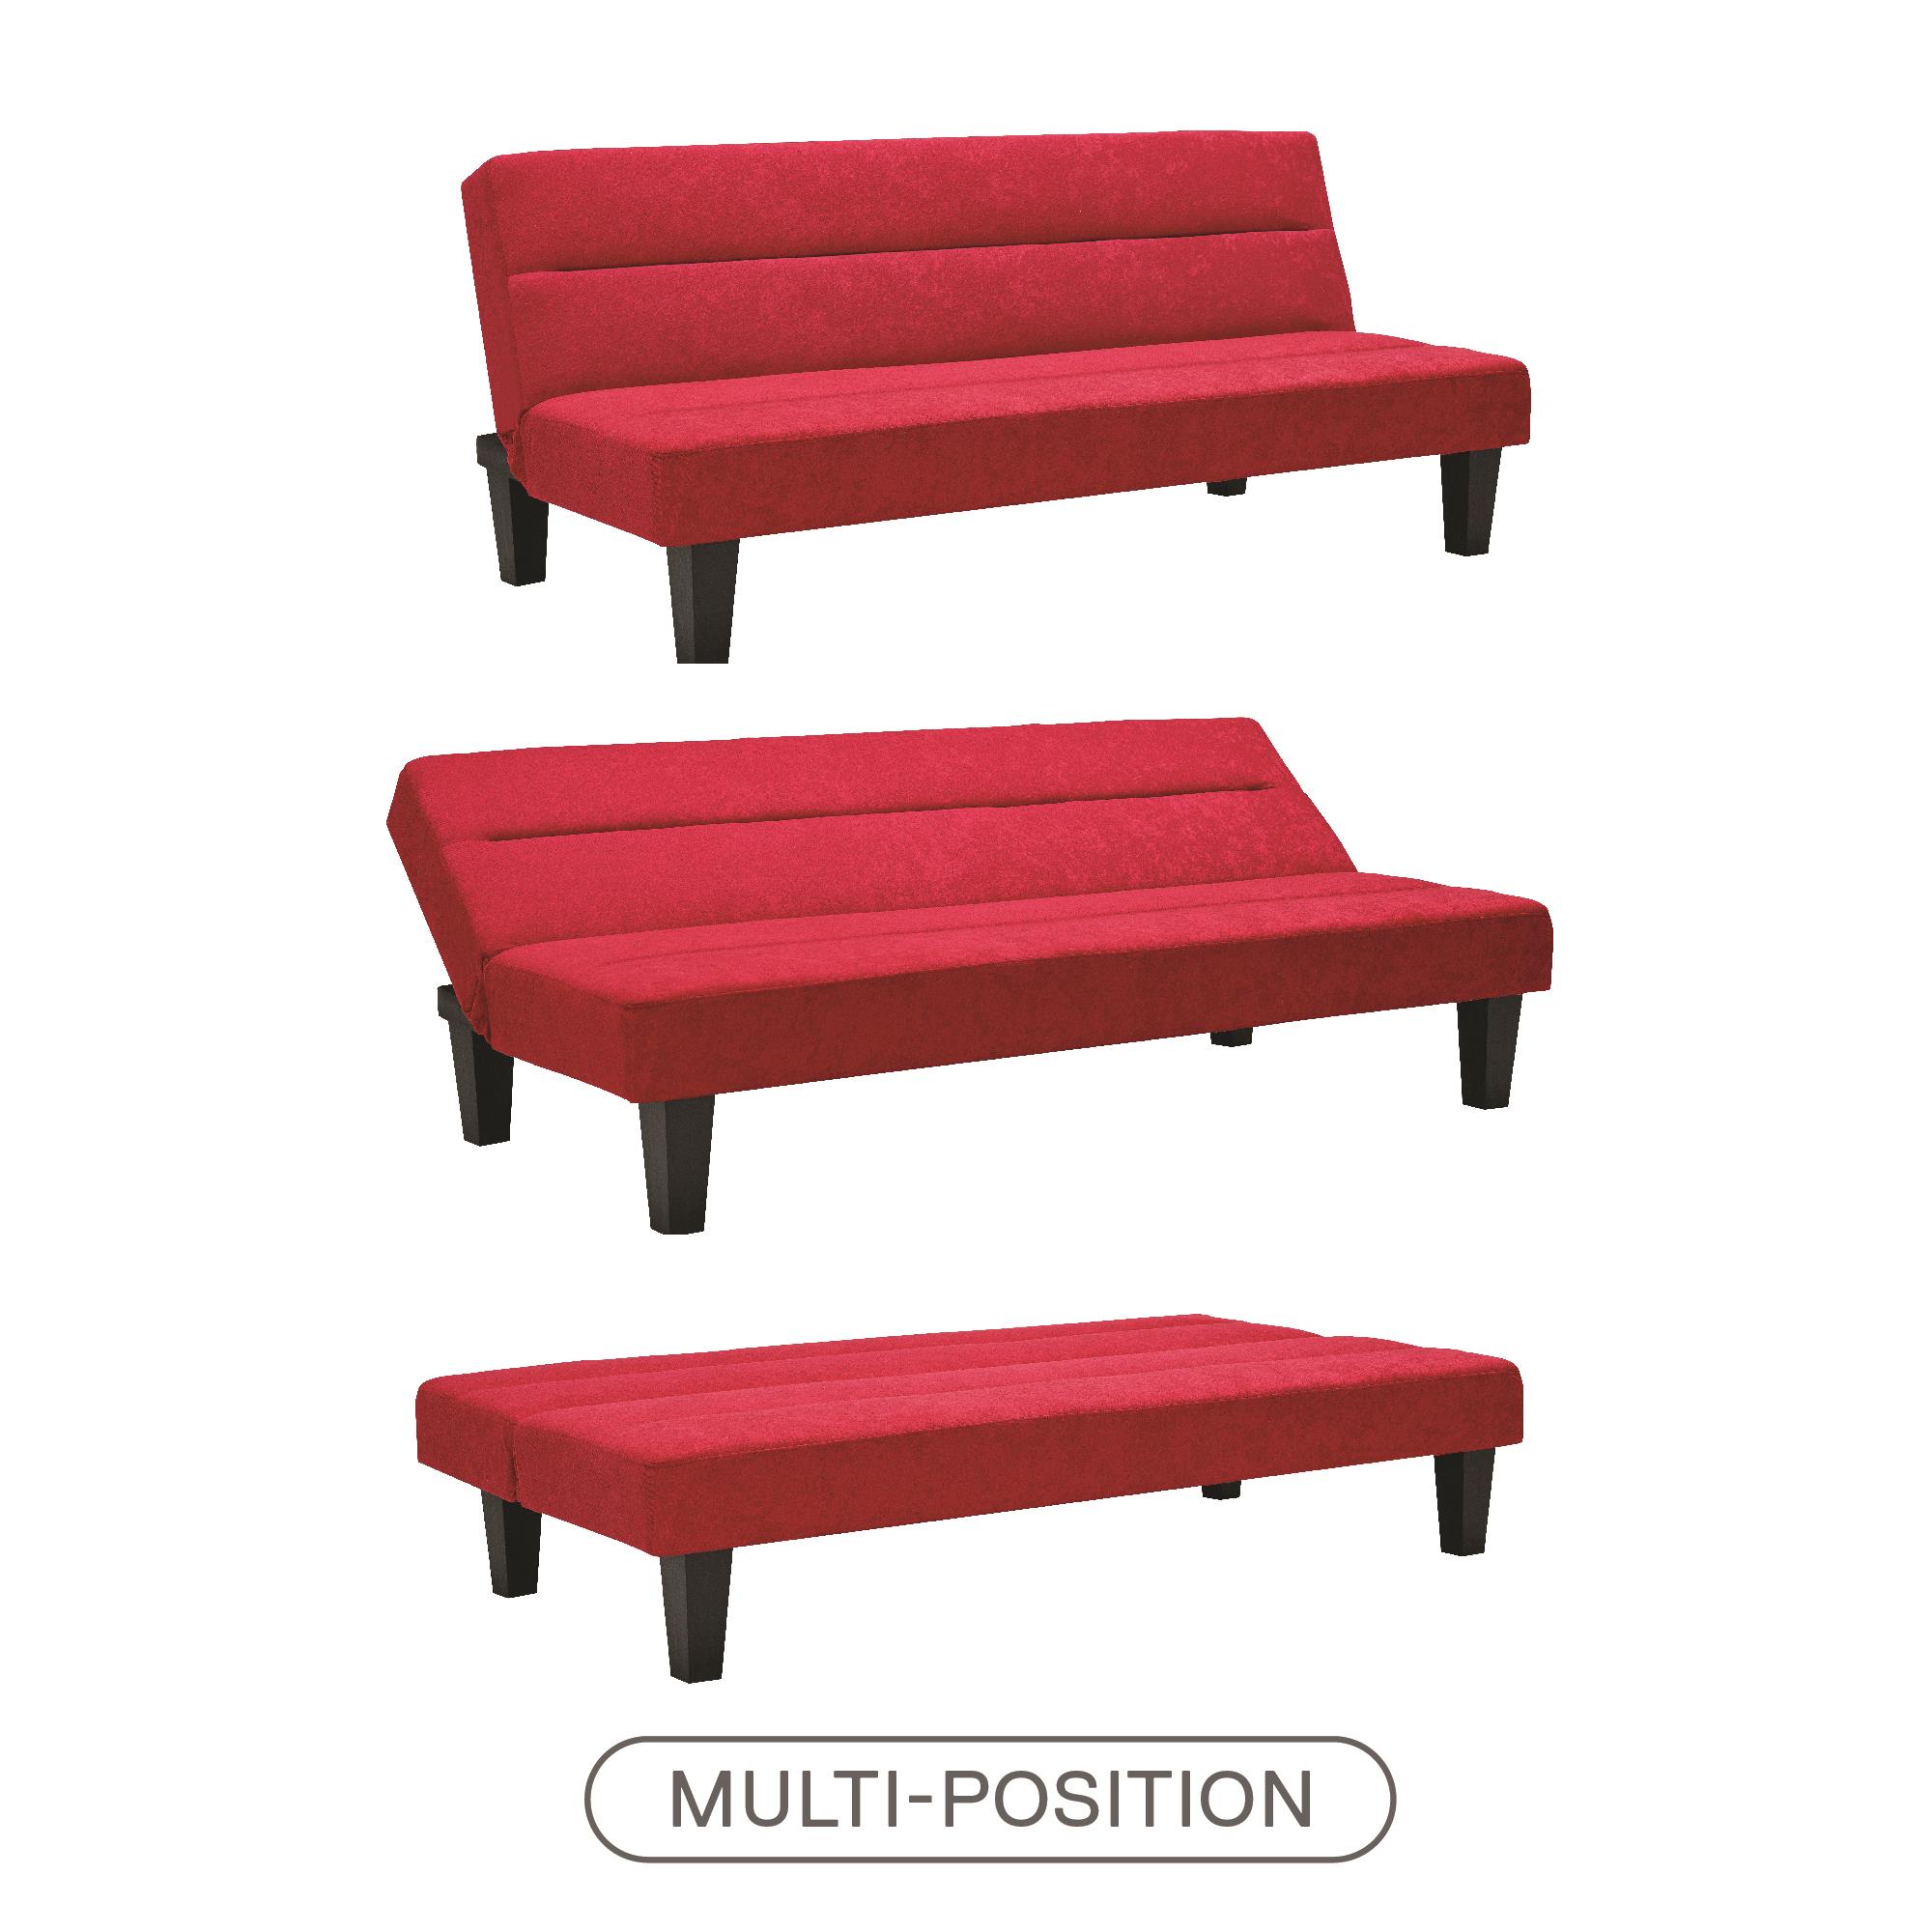 DHP Kebo Futon with Microfiber Cover, Red - image 8 of 13